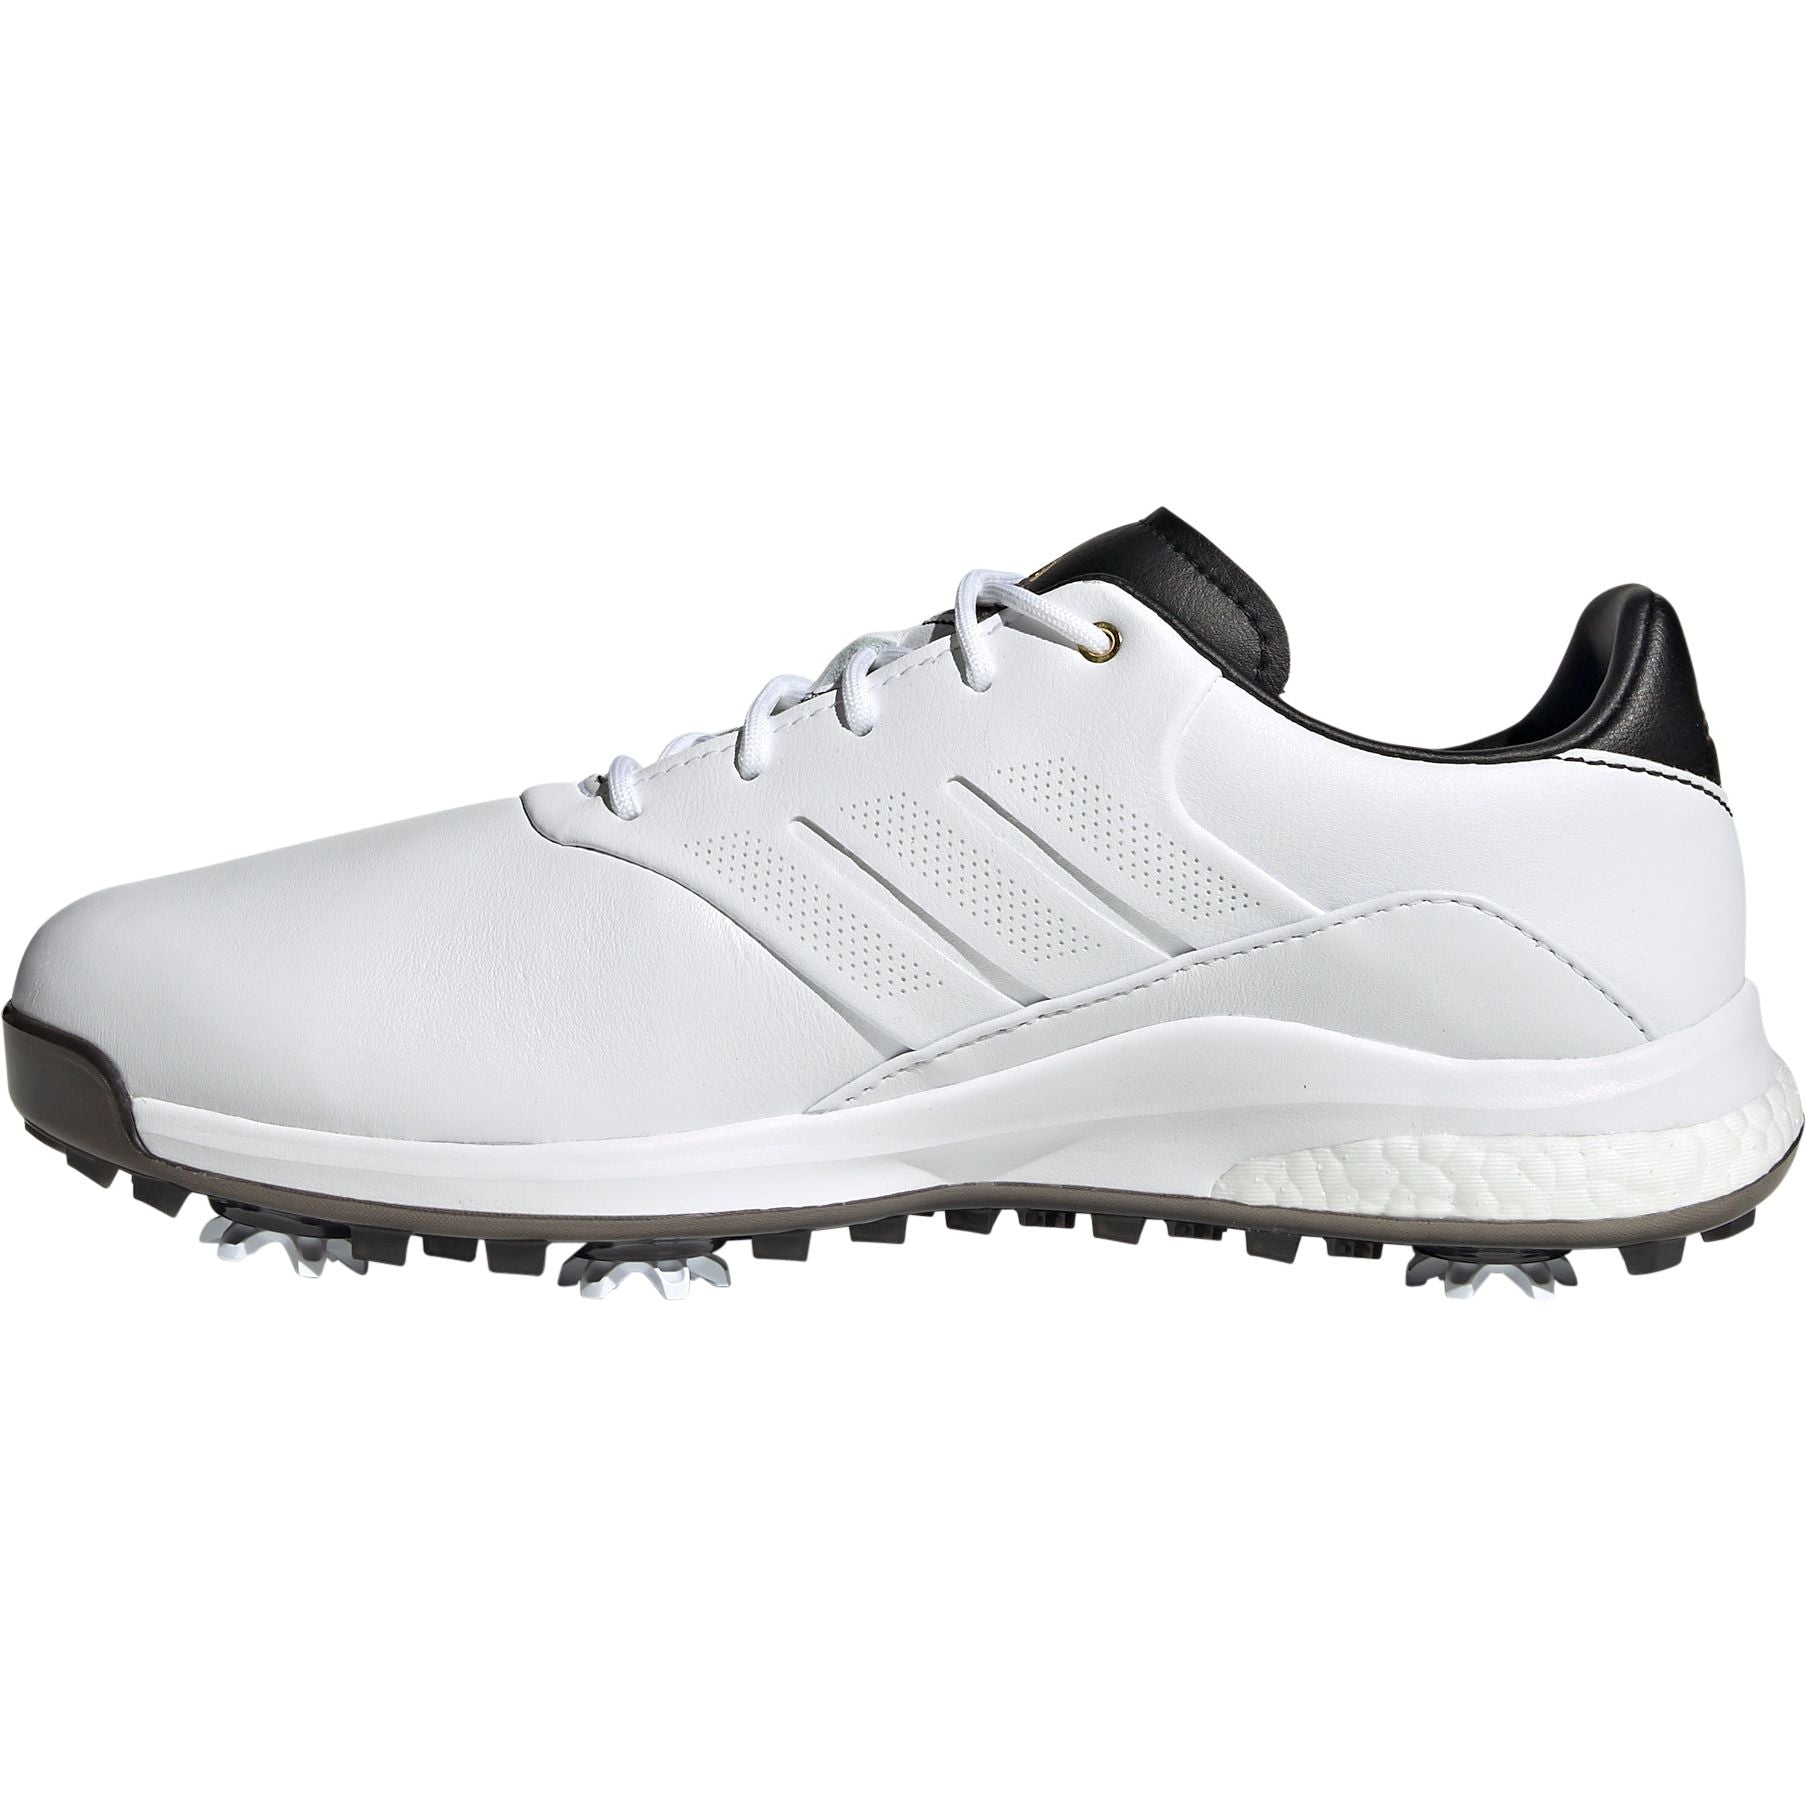 Adidas Performance Classic Golf Shoes Fw6273 Inside - Side View